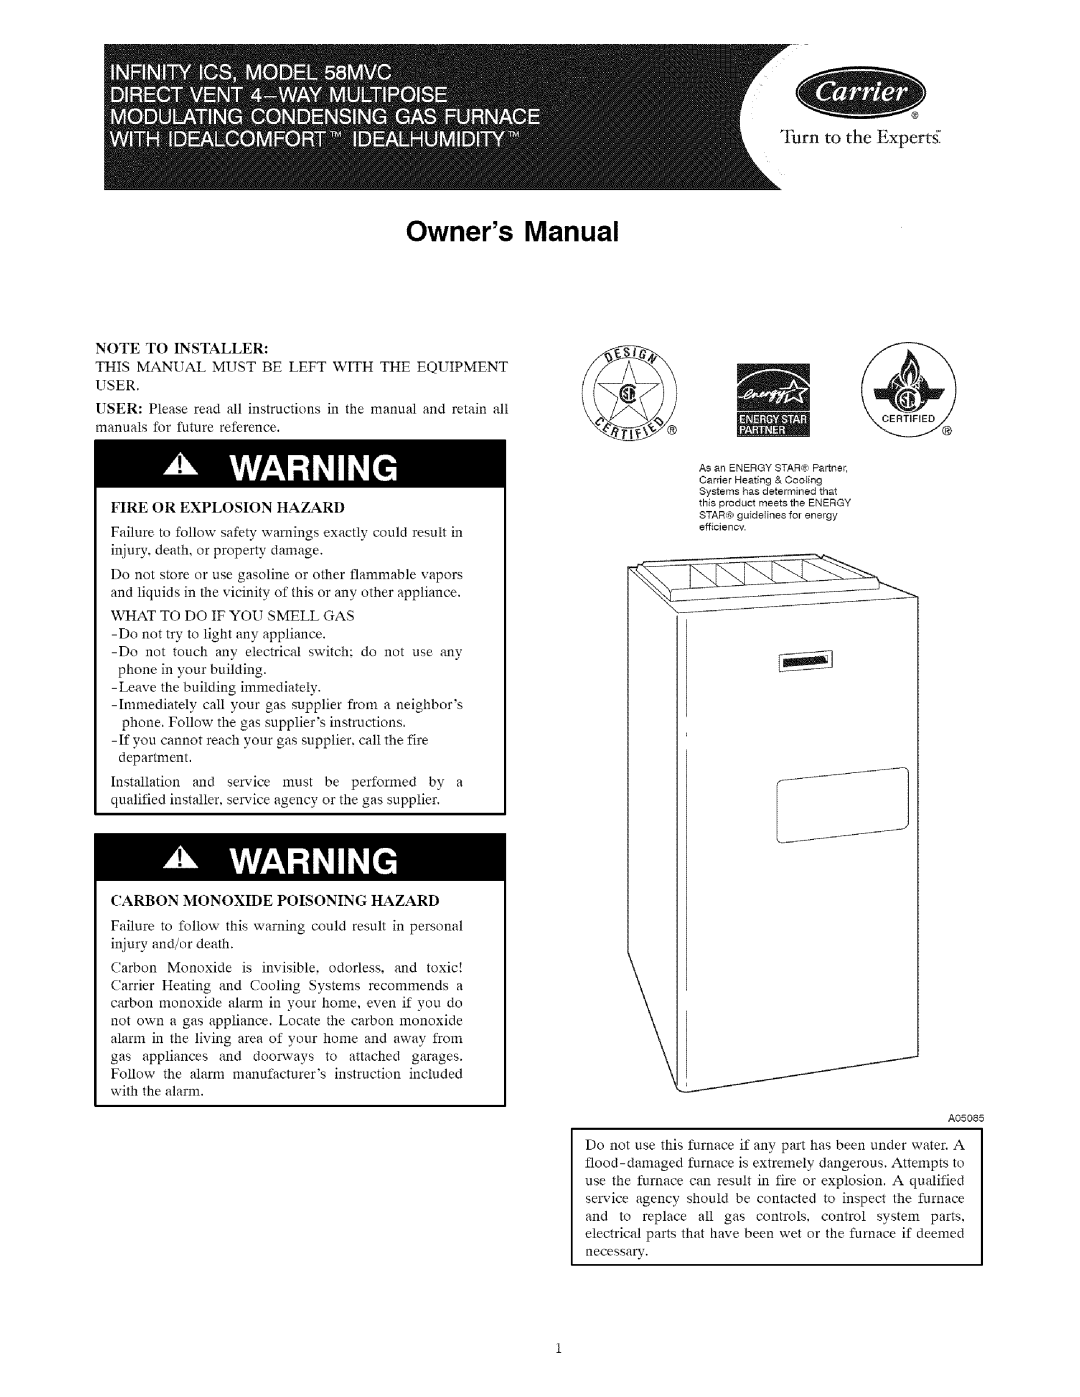 Carrier 58MVC owner manual Turn to the Expertg, Note To Installer 